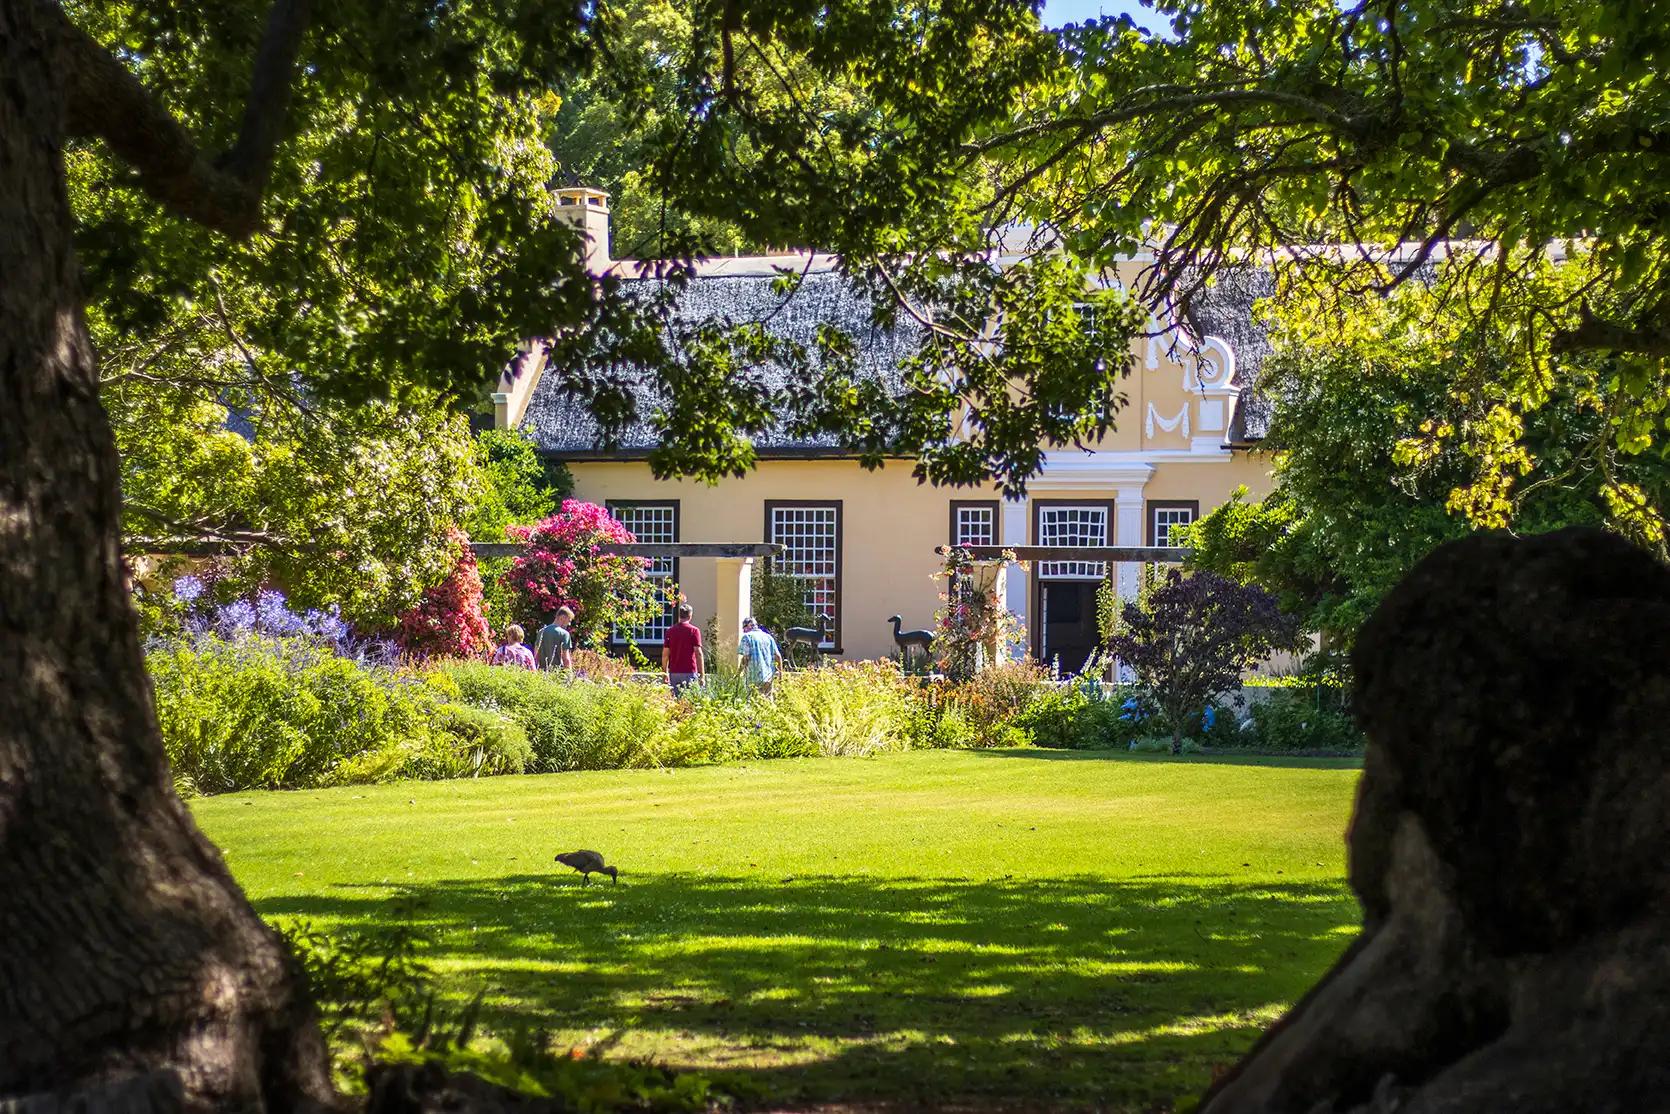 Vergelegen Wine Estate: A Guide to its Grounds and Gardens